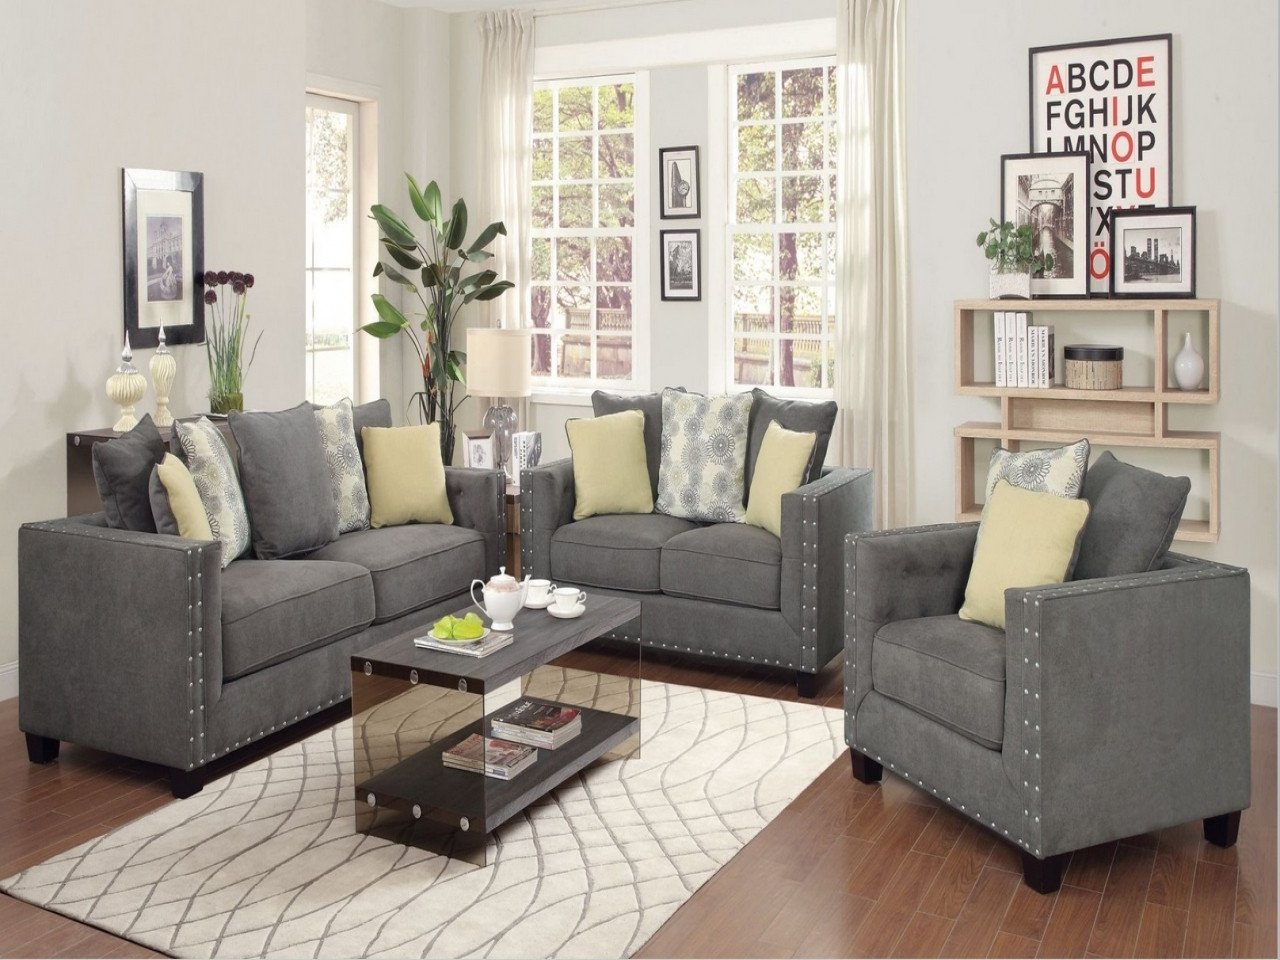 Fabric ideas for dining room chairs grey living room